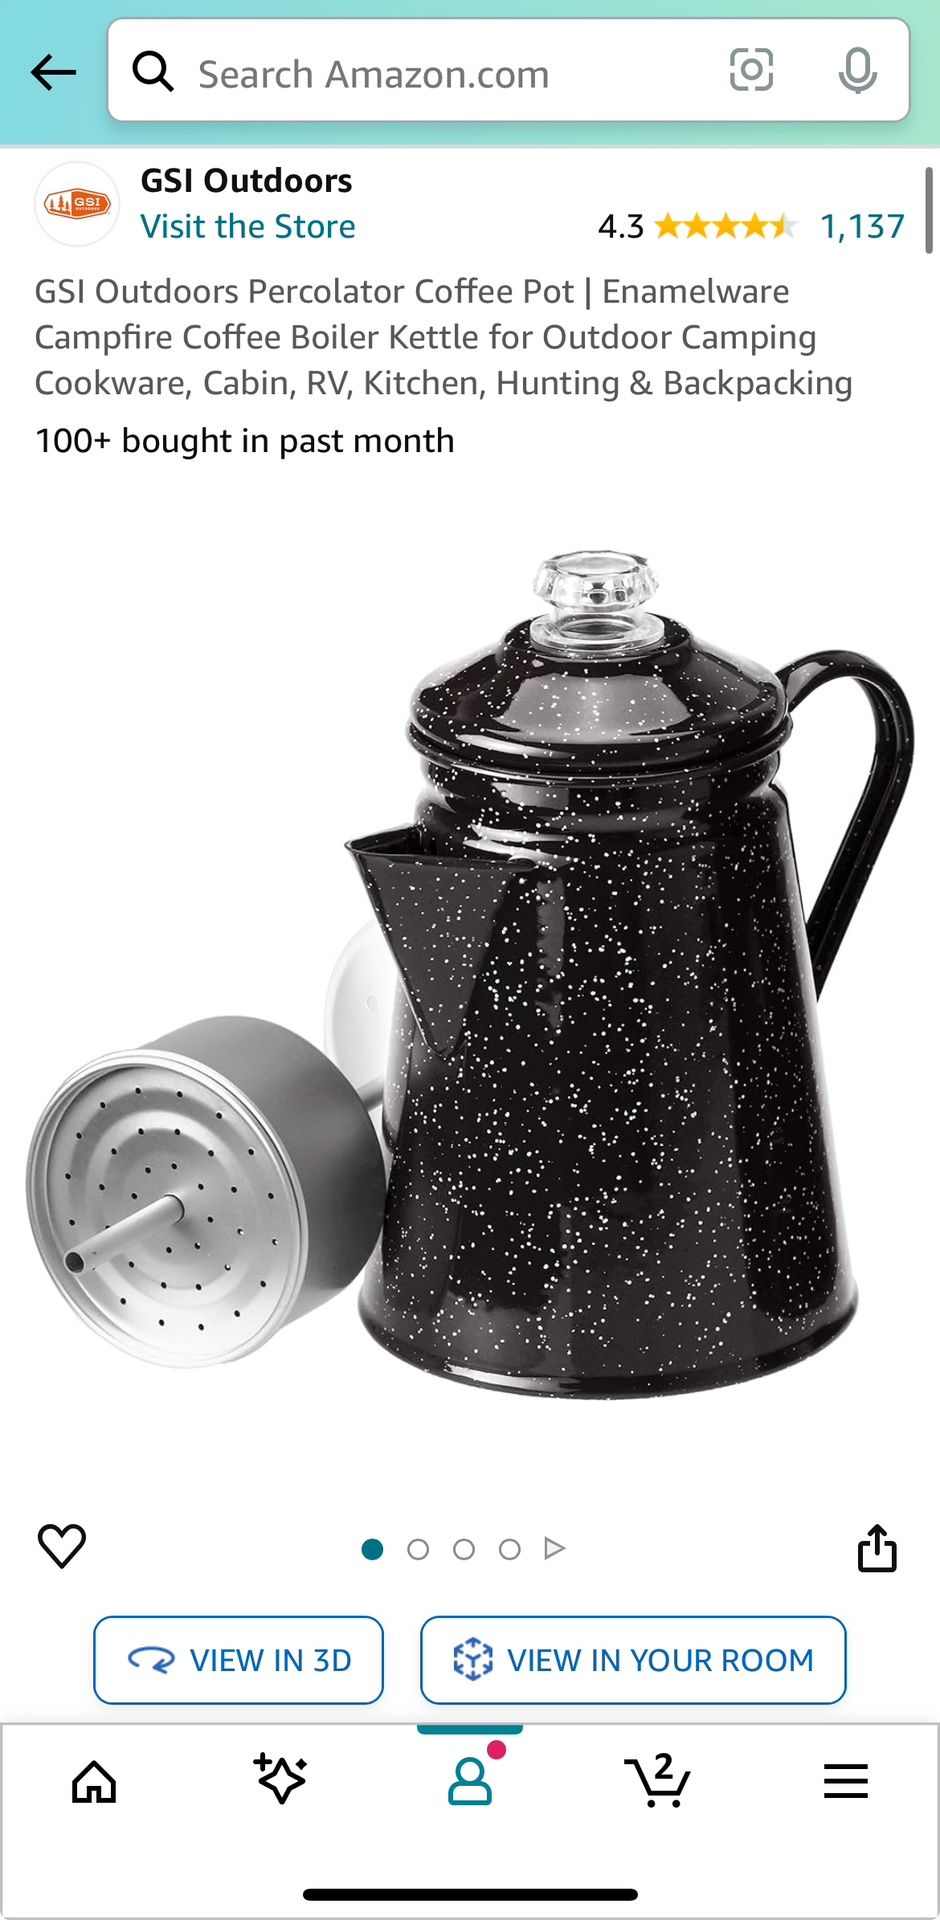 Used 1-2 time: GSI Outdoors Percolator Coffee Pot, Enamelware Campfire Coffee Boiler Kettle, Camping